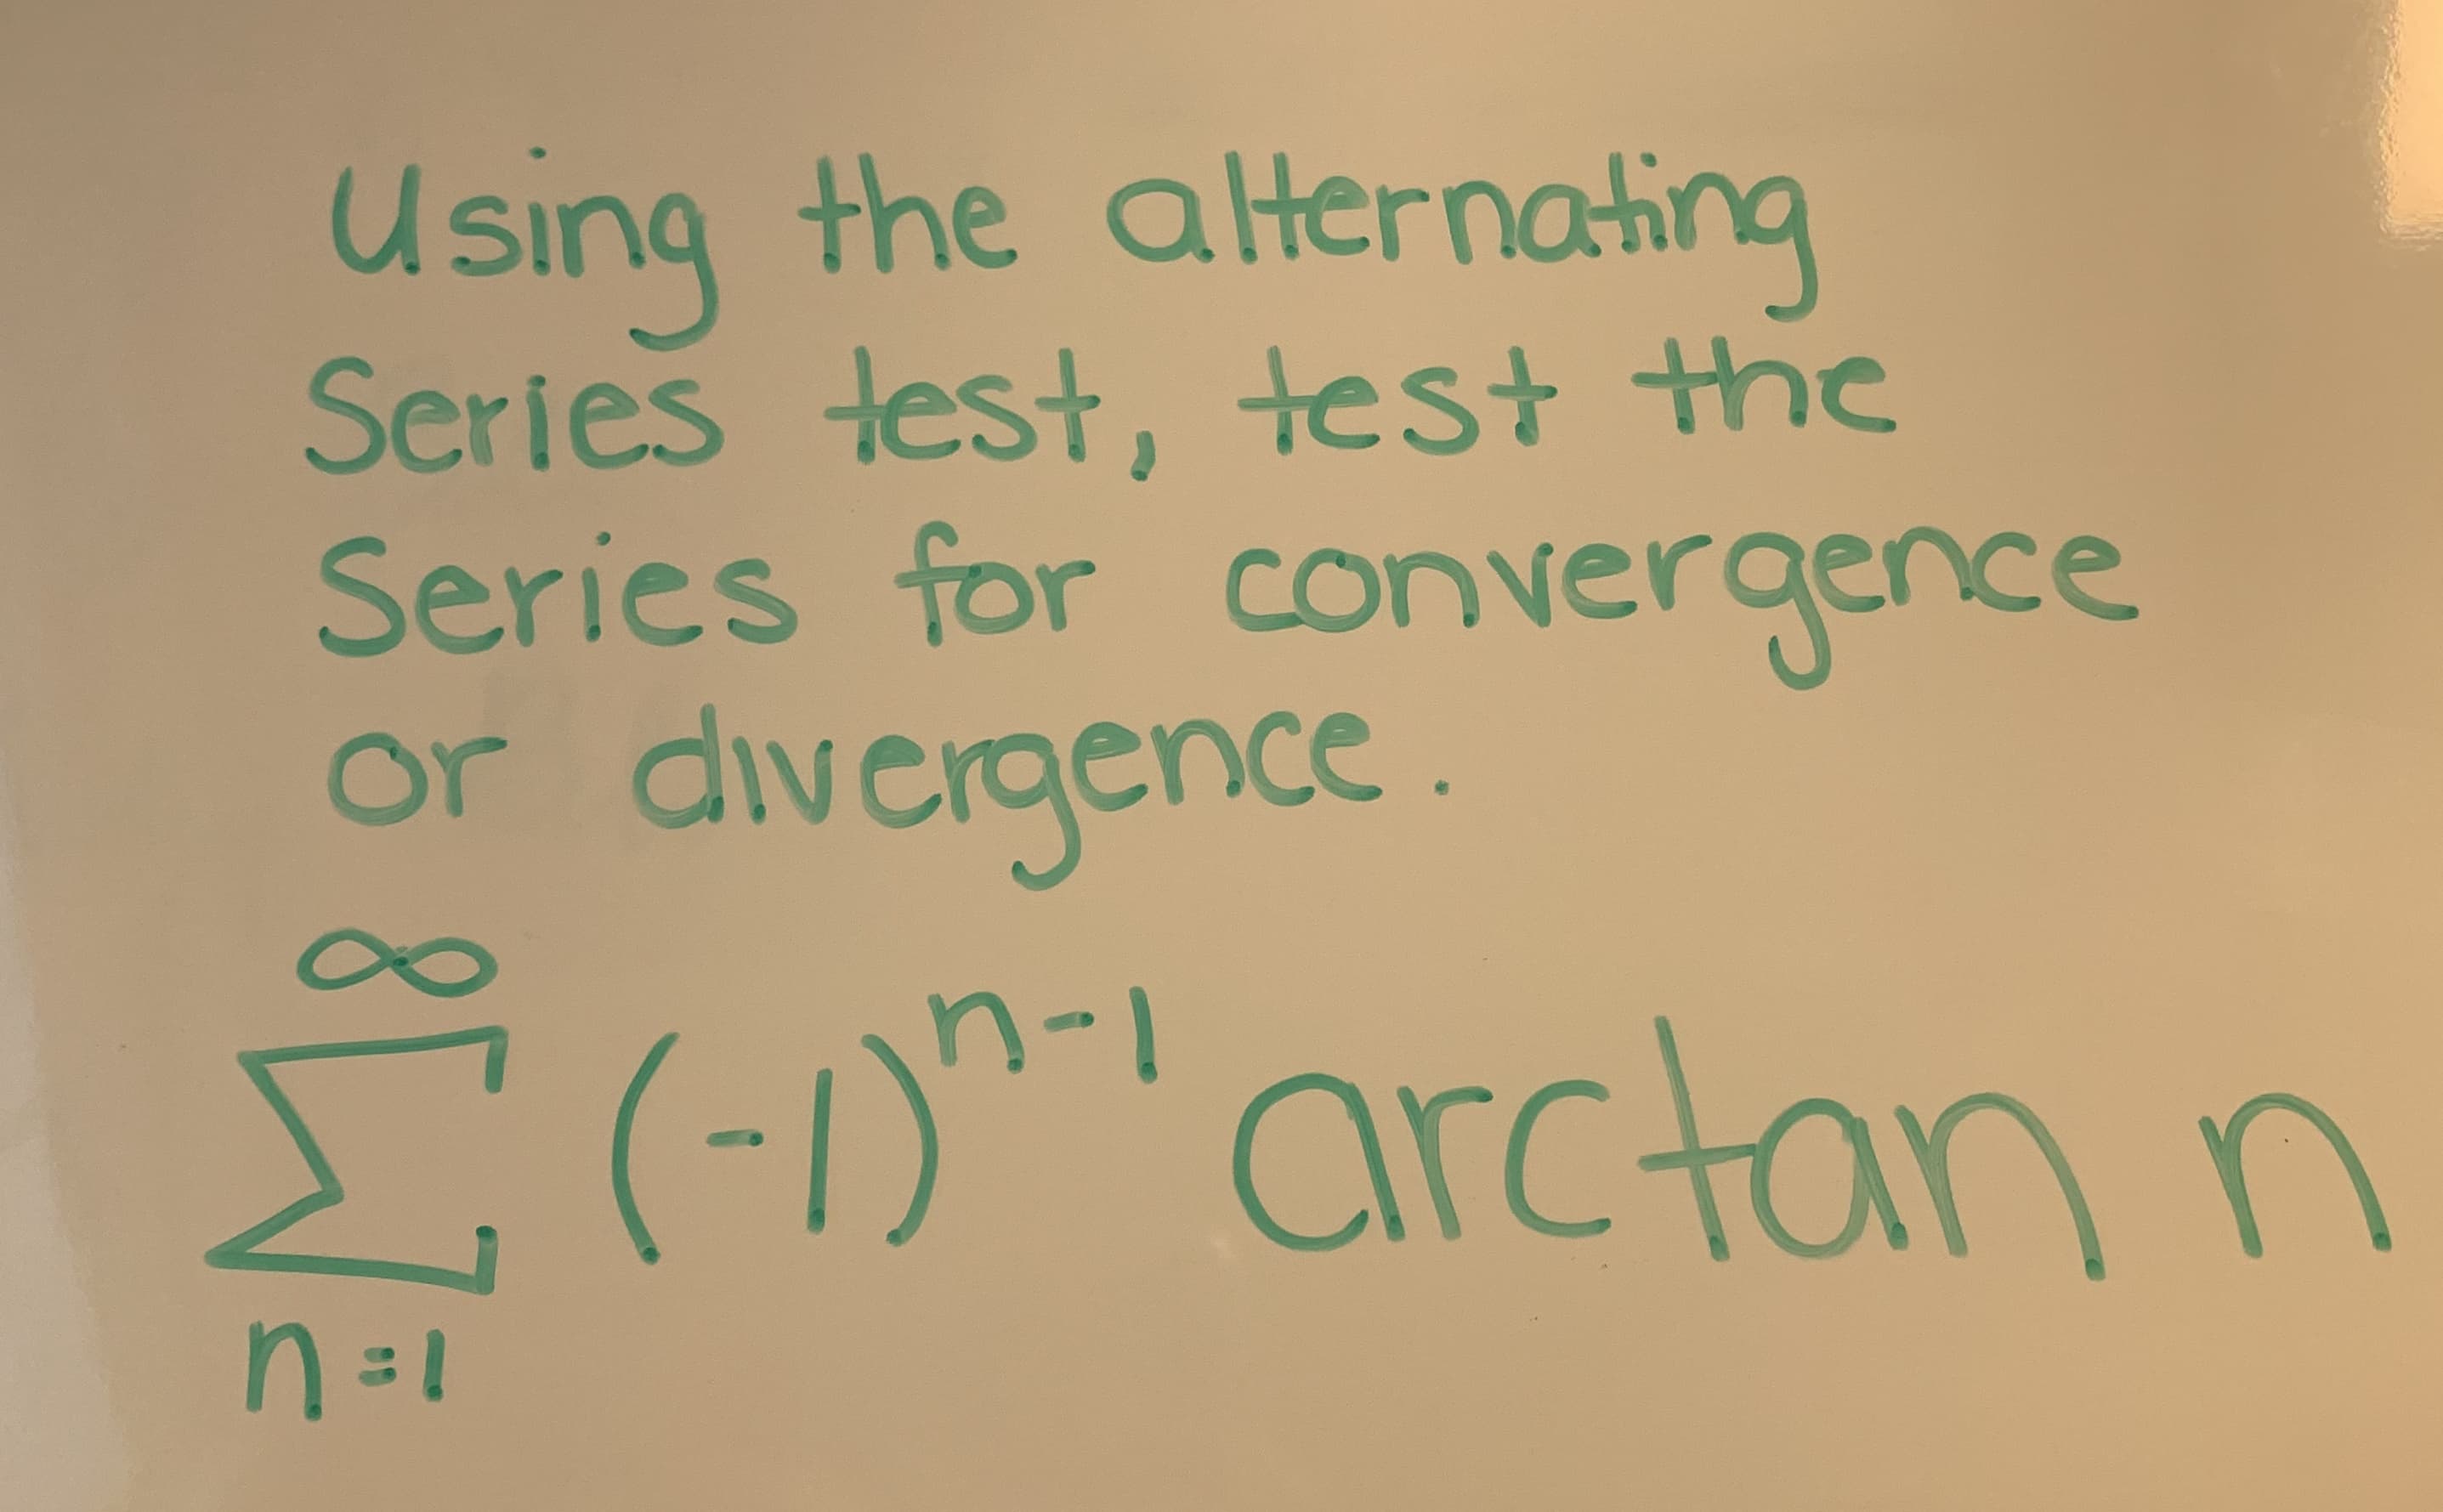 using the alternoting
Series lest, test the
Series for convergence
or divergence
n-1
